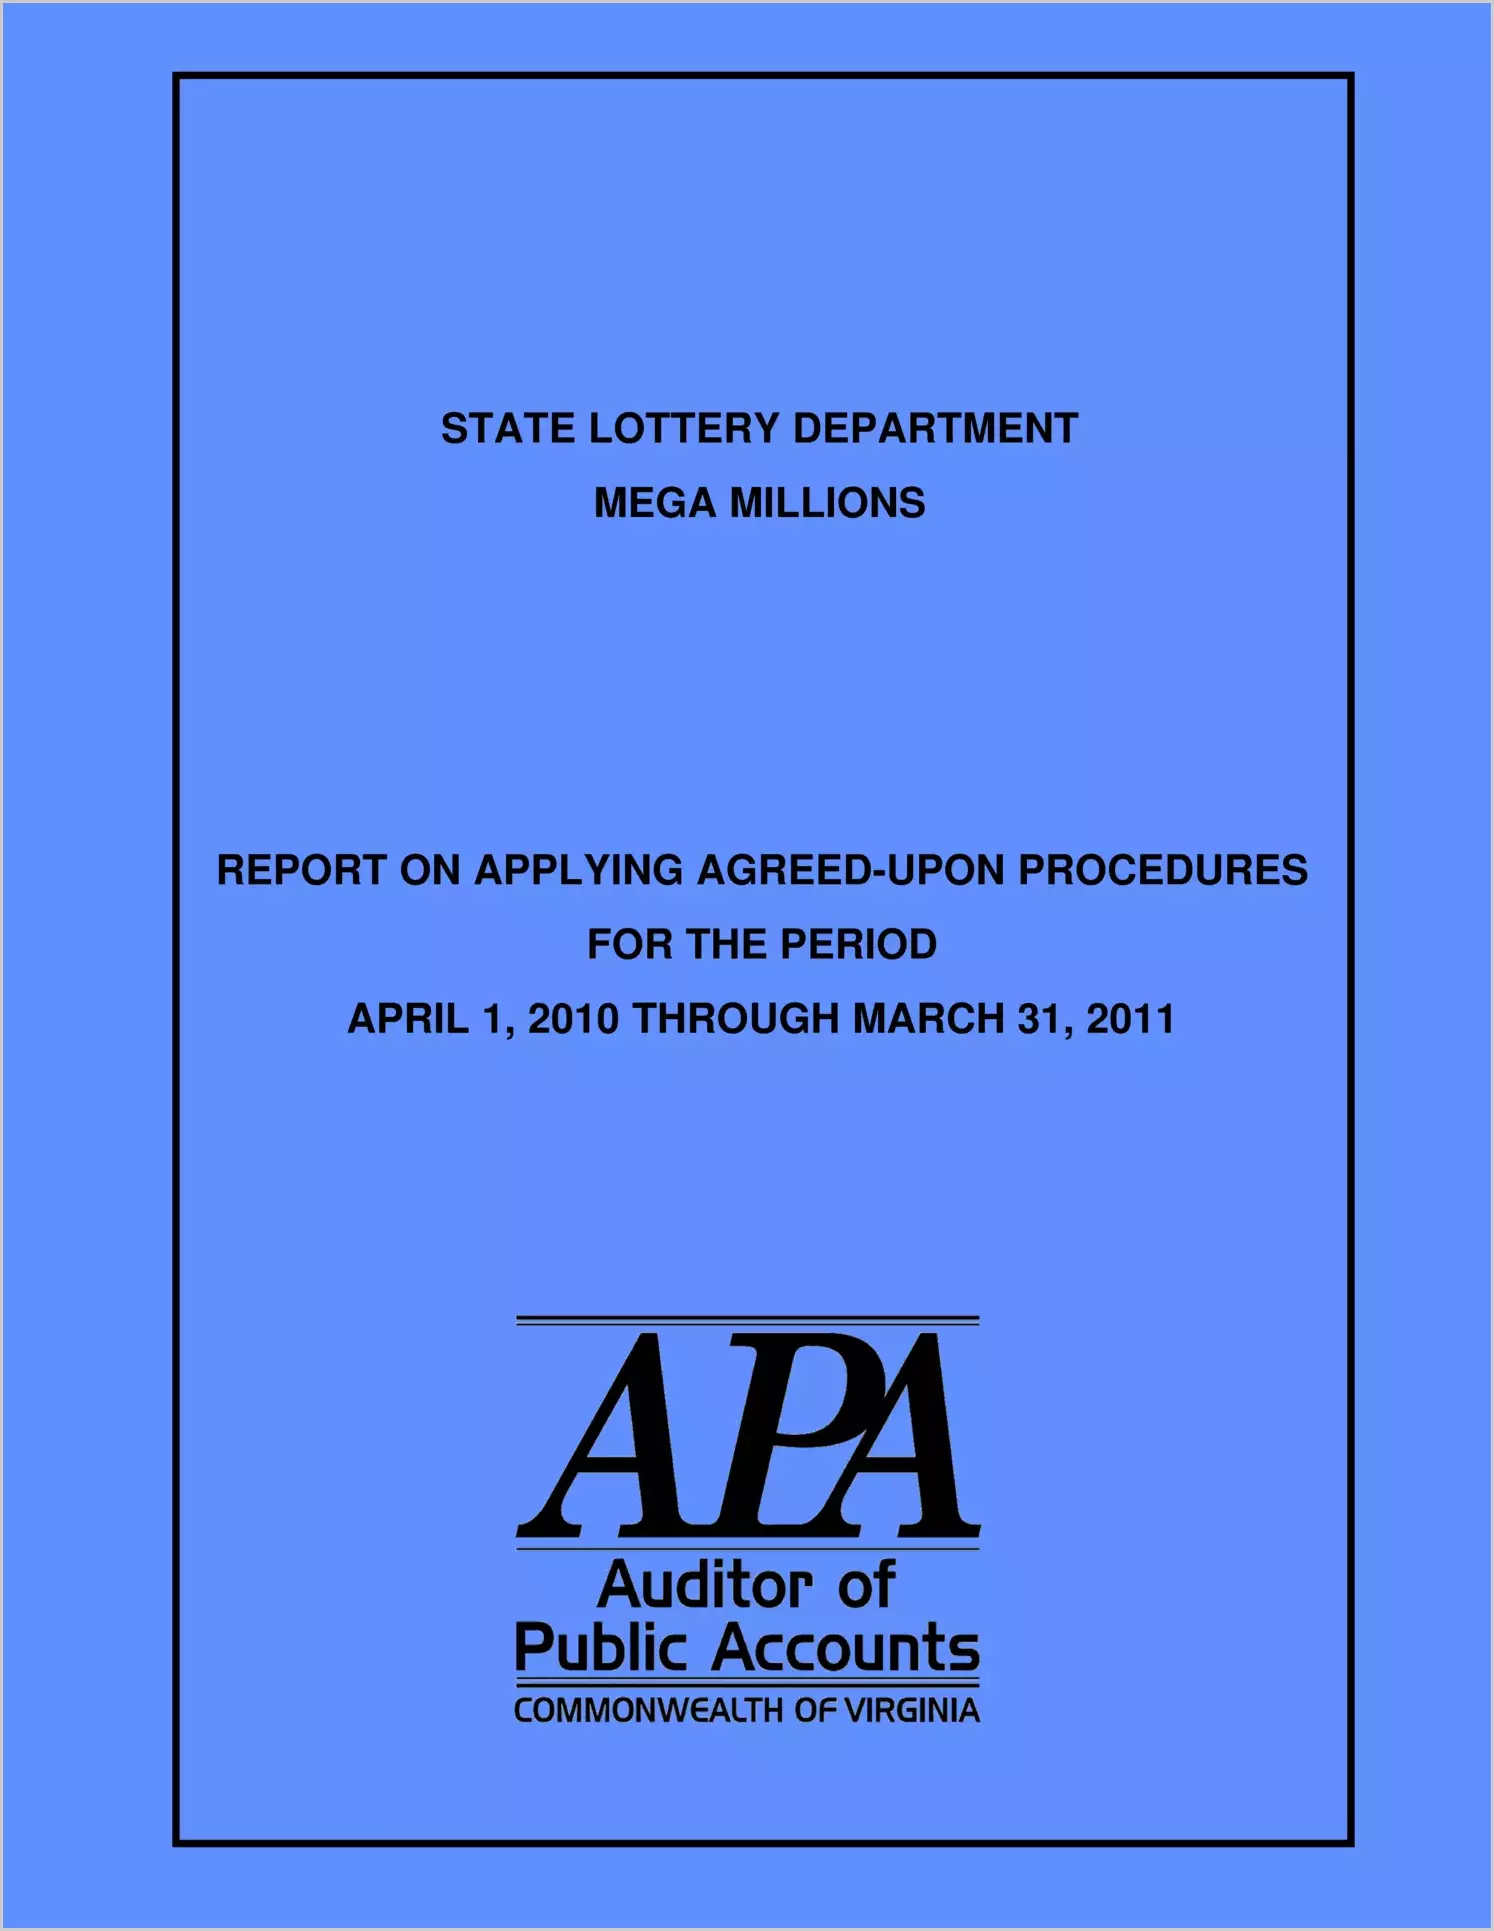 State Lottery Department Mega Millions report on Applying Agreed-Upon Procedures (MegaMillions) for the period April 1, 2010 through March 31, 2011